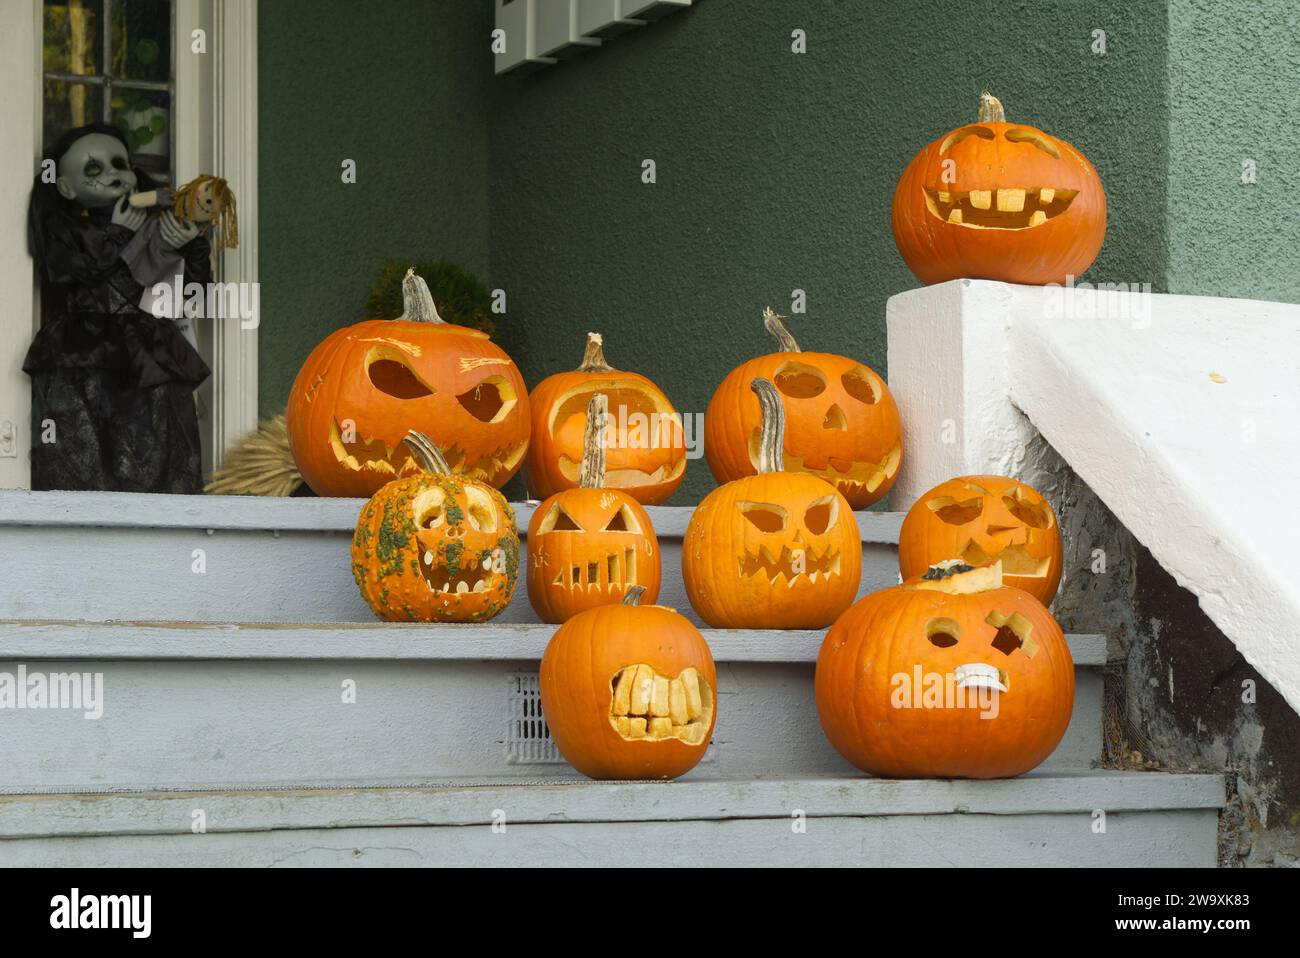 Humorous carved Halloween pumpkins displayed on the wooden front stairs of a house Stock Photo